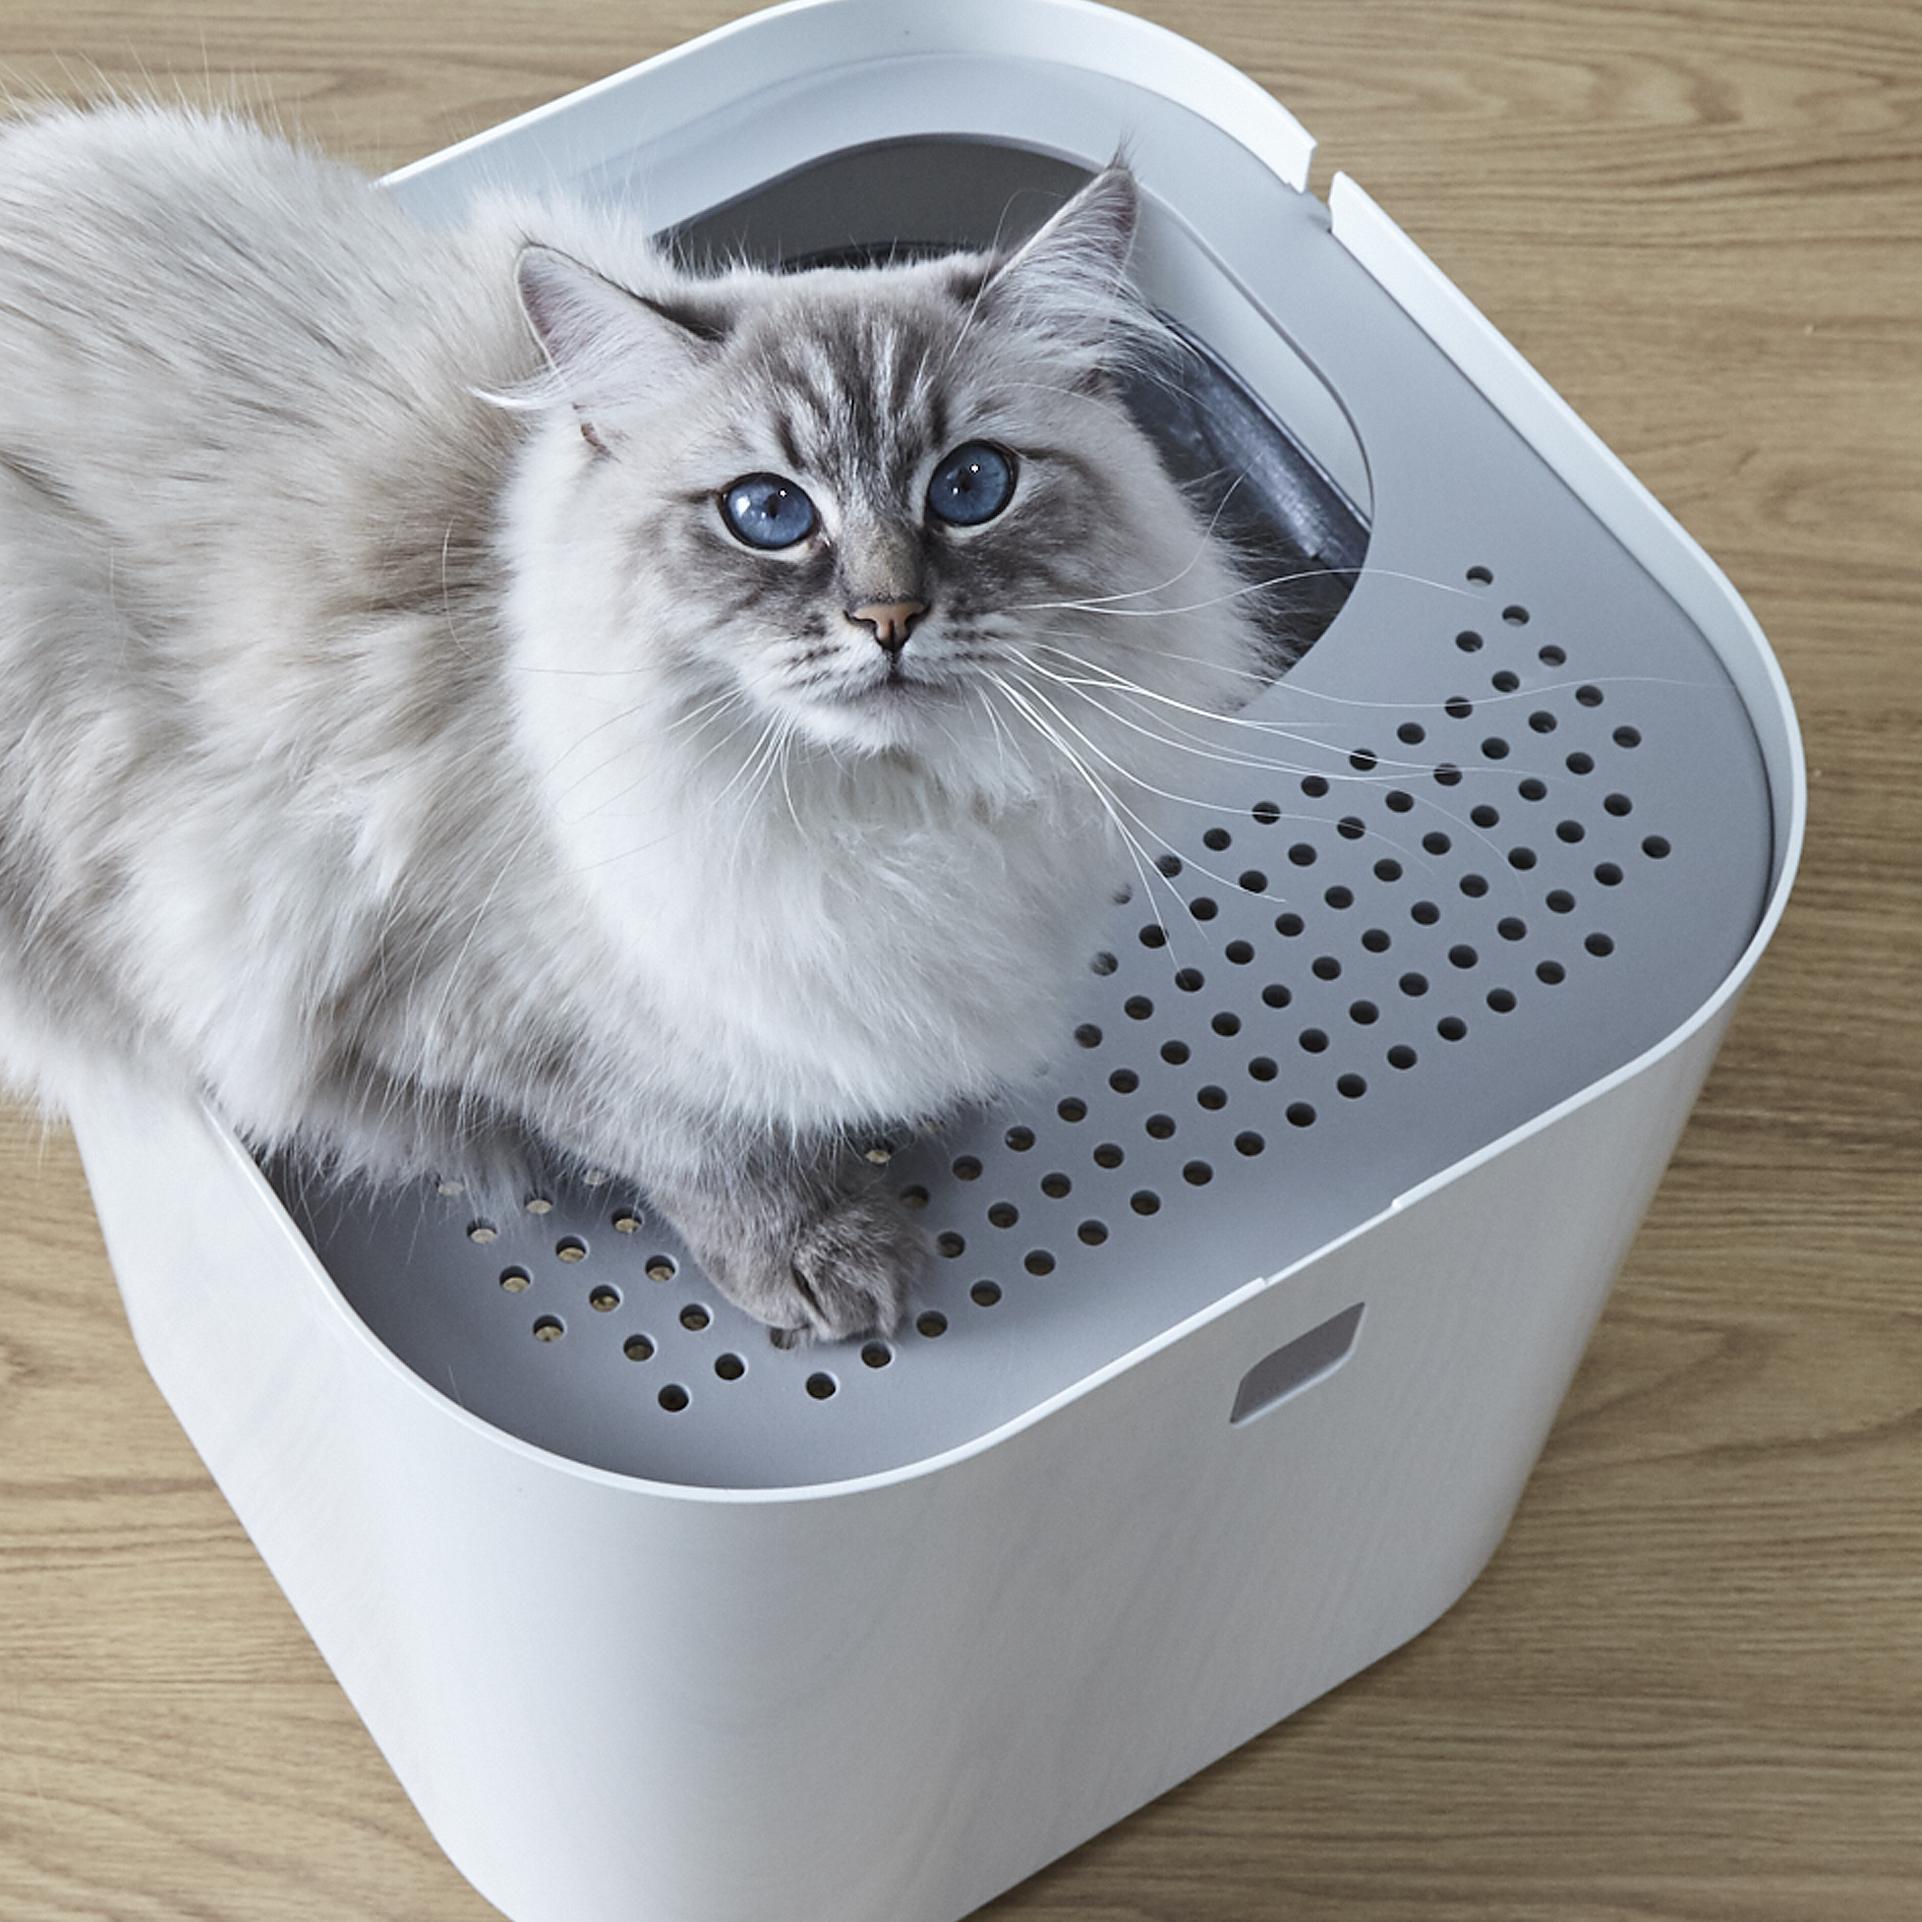 All things about ModKat Litter Box that you should know